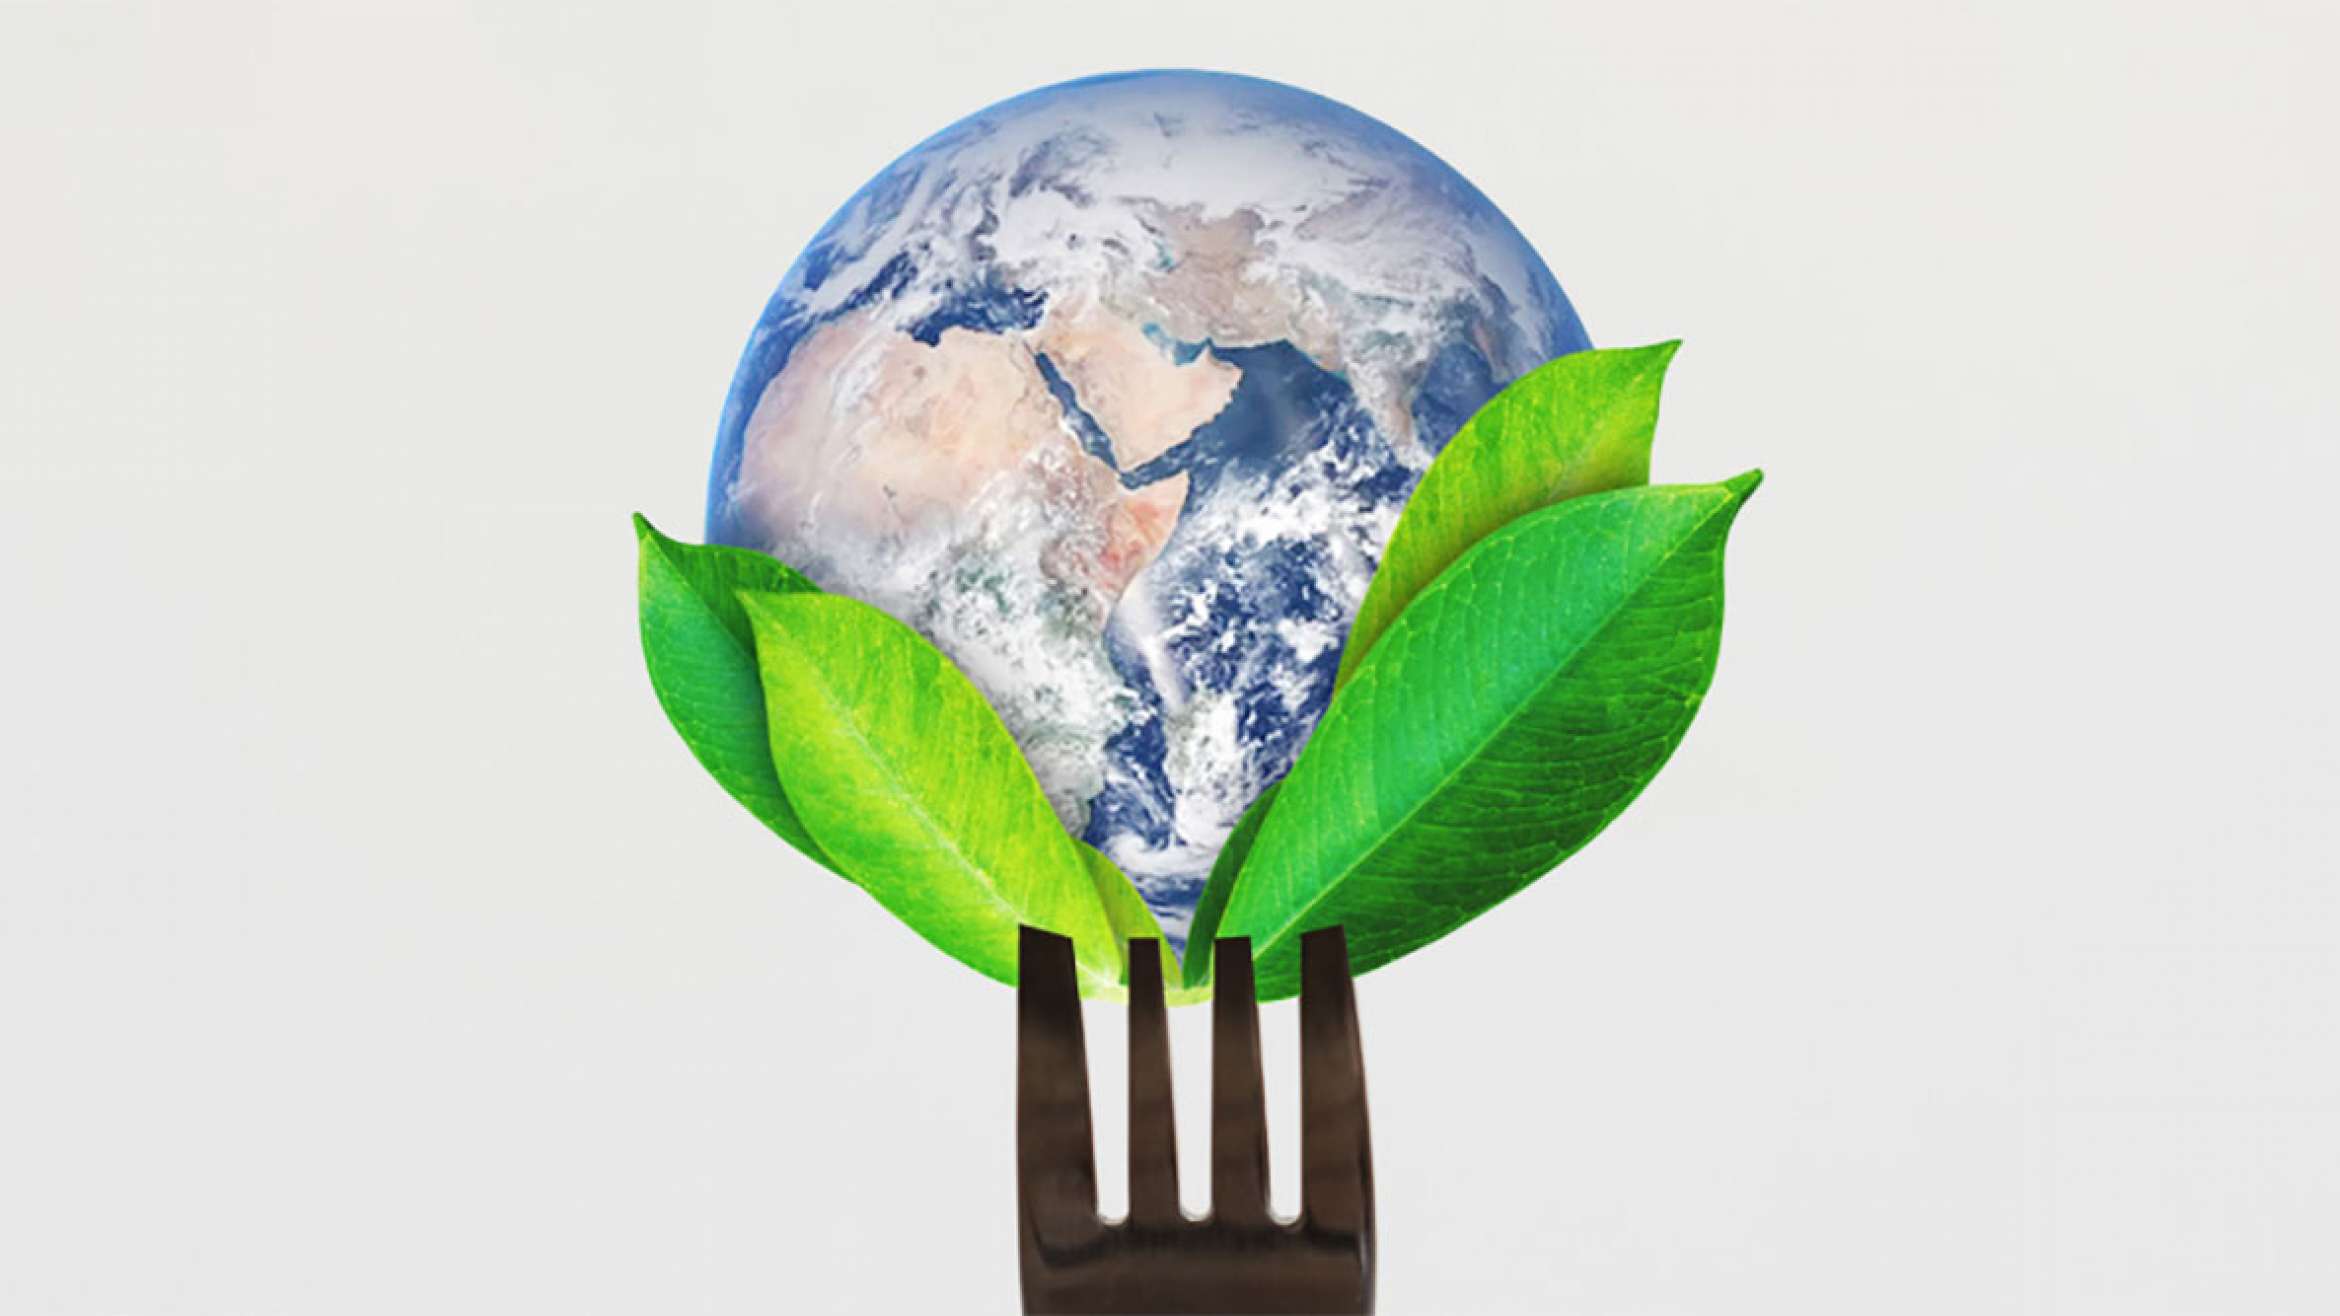 Globe on the tines of a fork with some green leaves Earth Day 2021